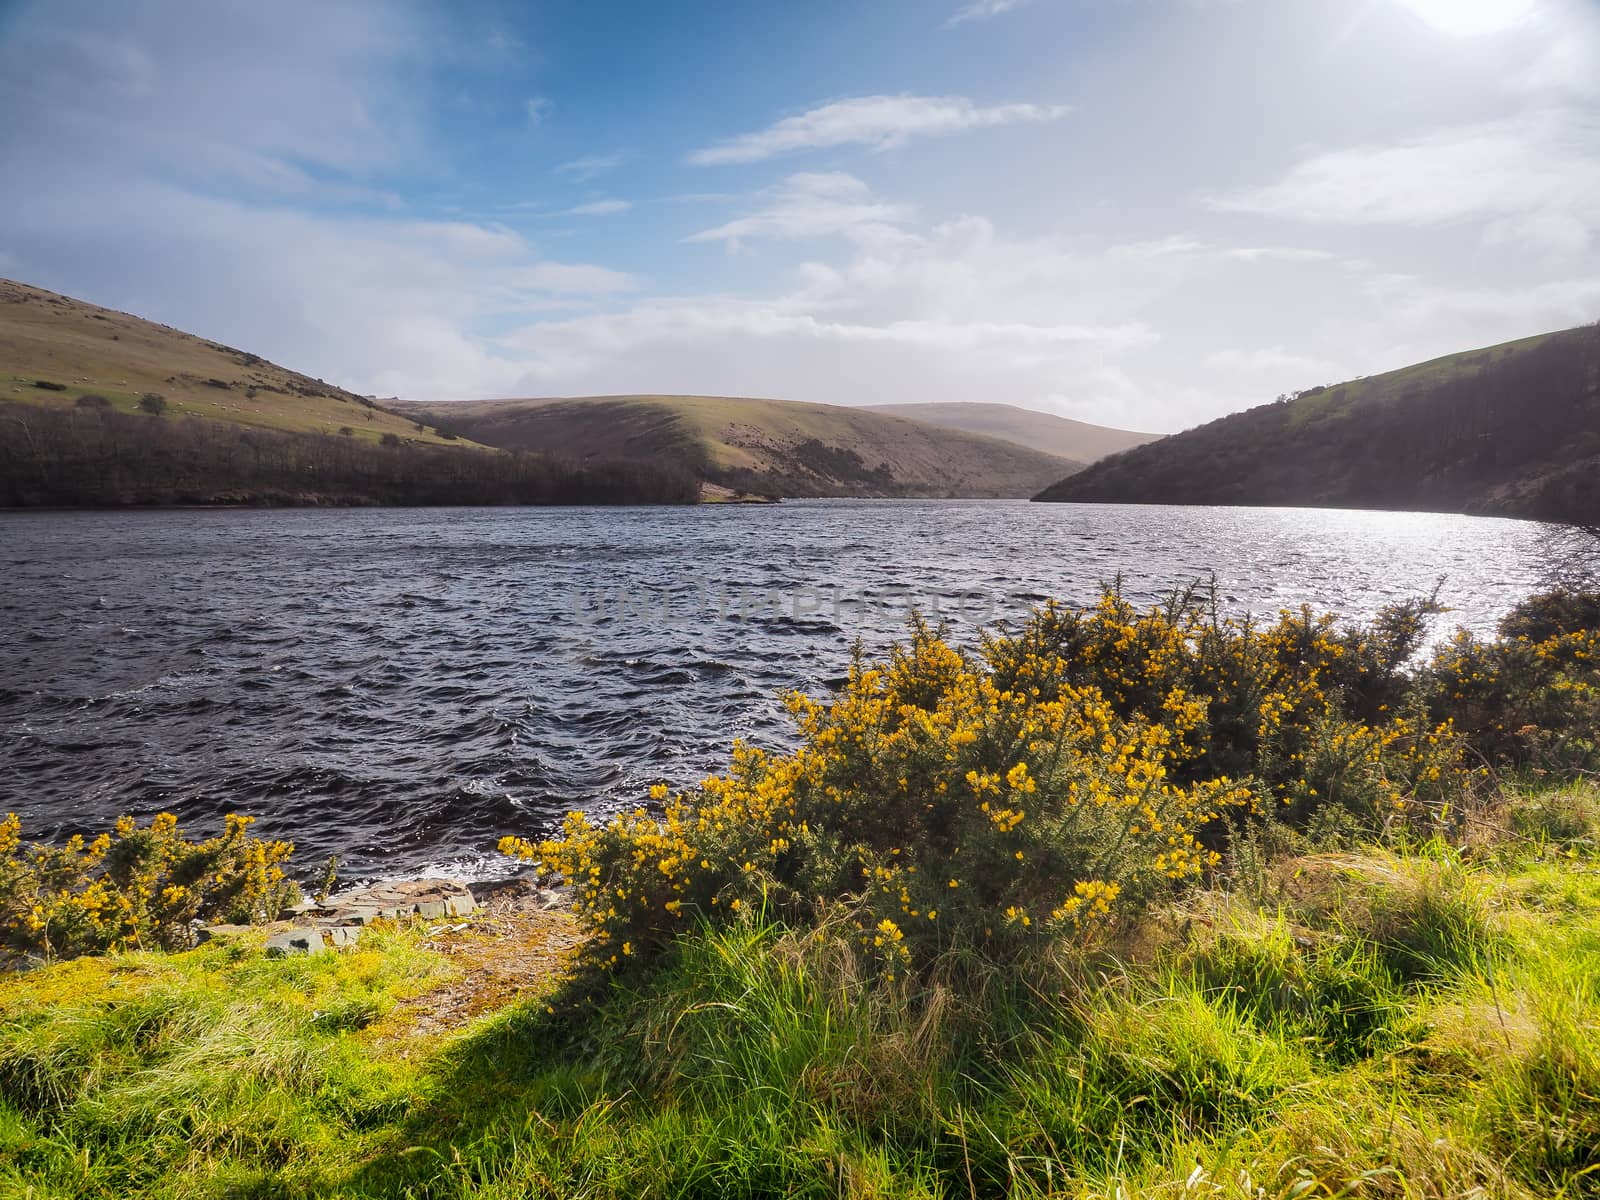 View across Meldon Reservoir on the West Okement River with yellow gorse and sun reflecting on the water and white wispy clouds, Dartmoor National Park, Devon, UK